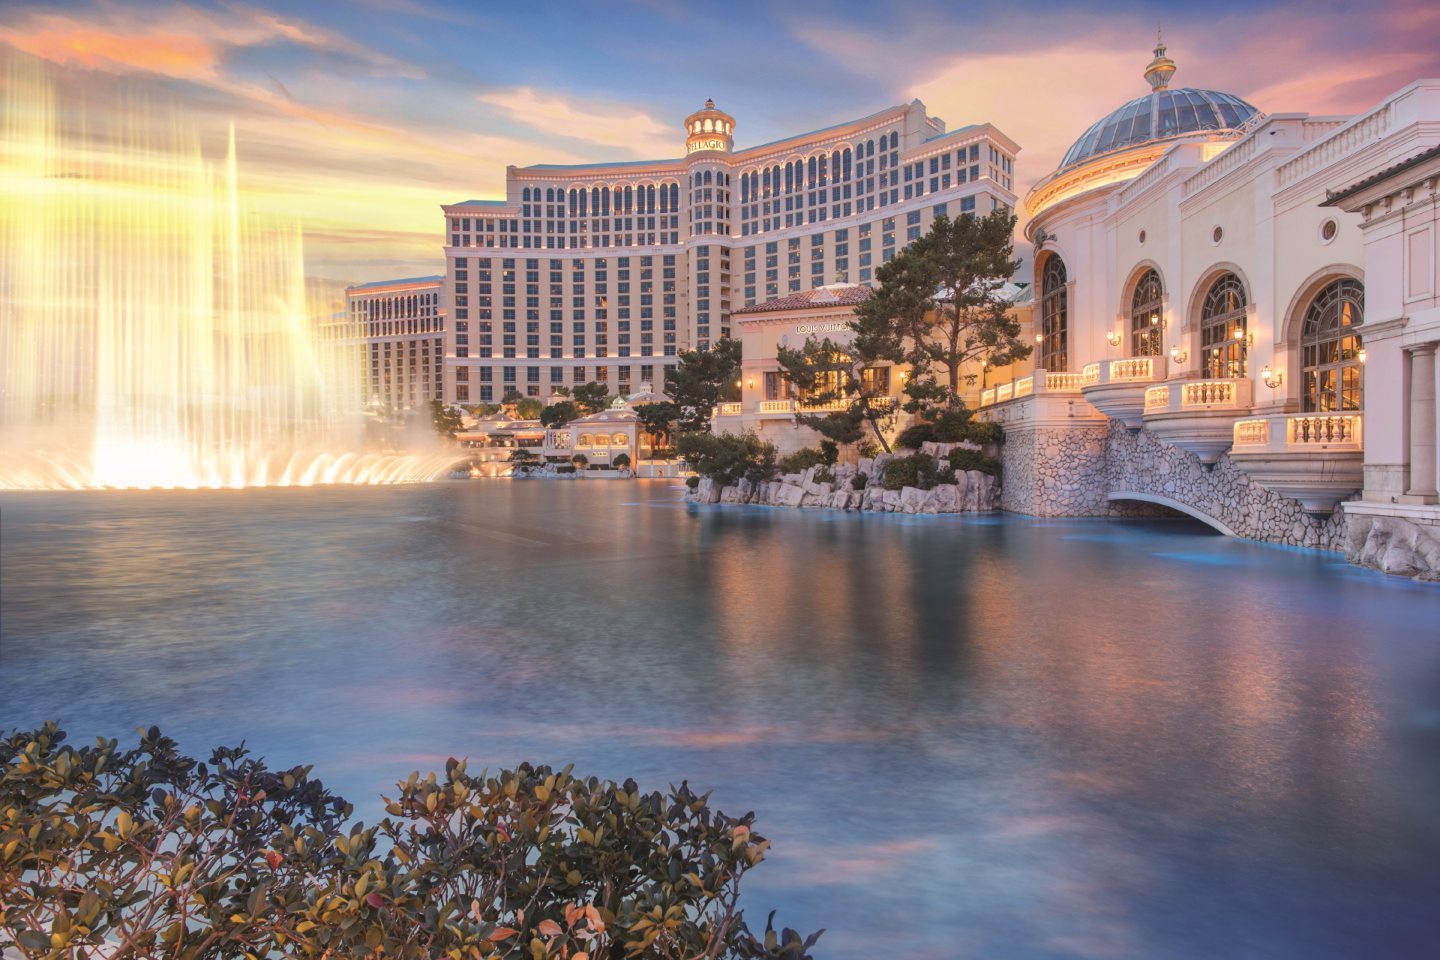 The Bellagio hotel with its dancing fountains on the Las Vegas Strip